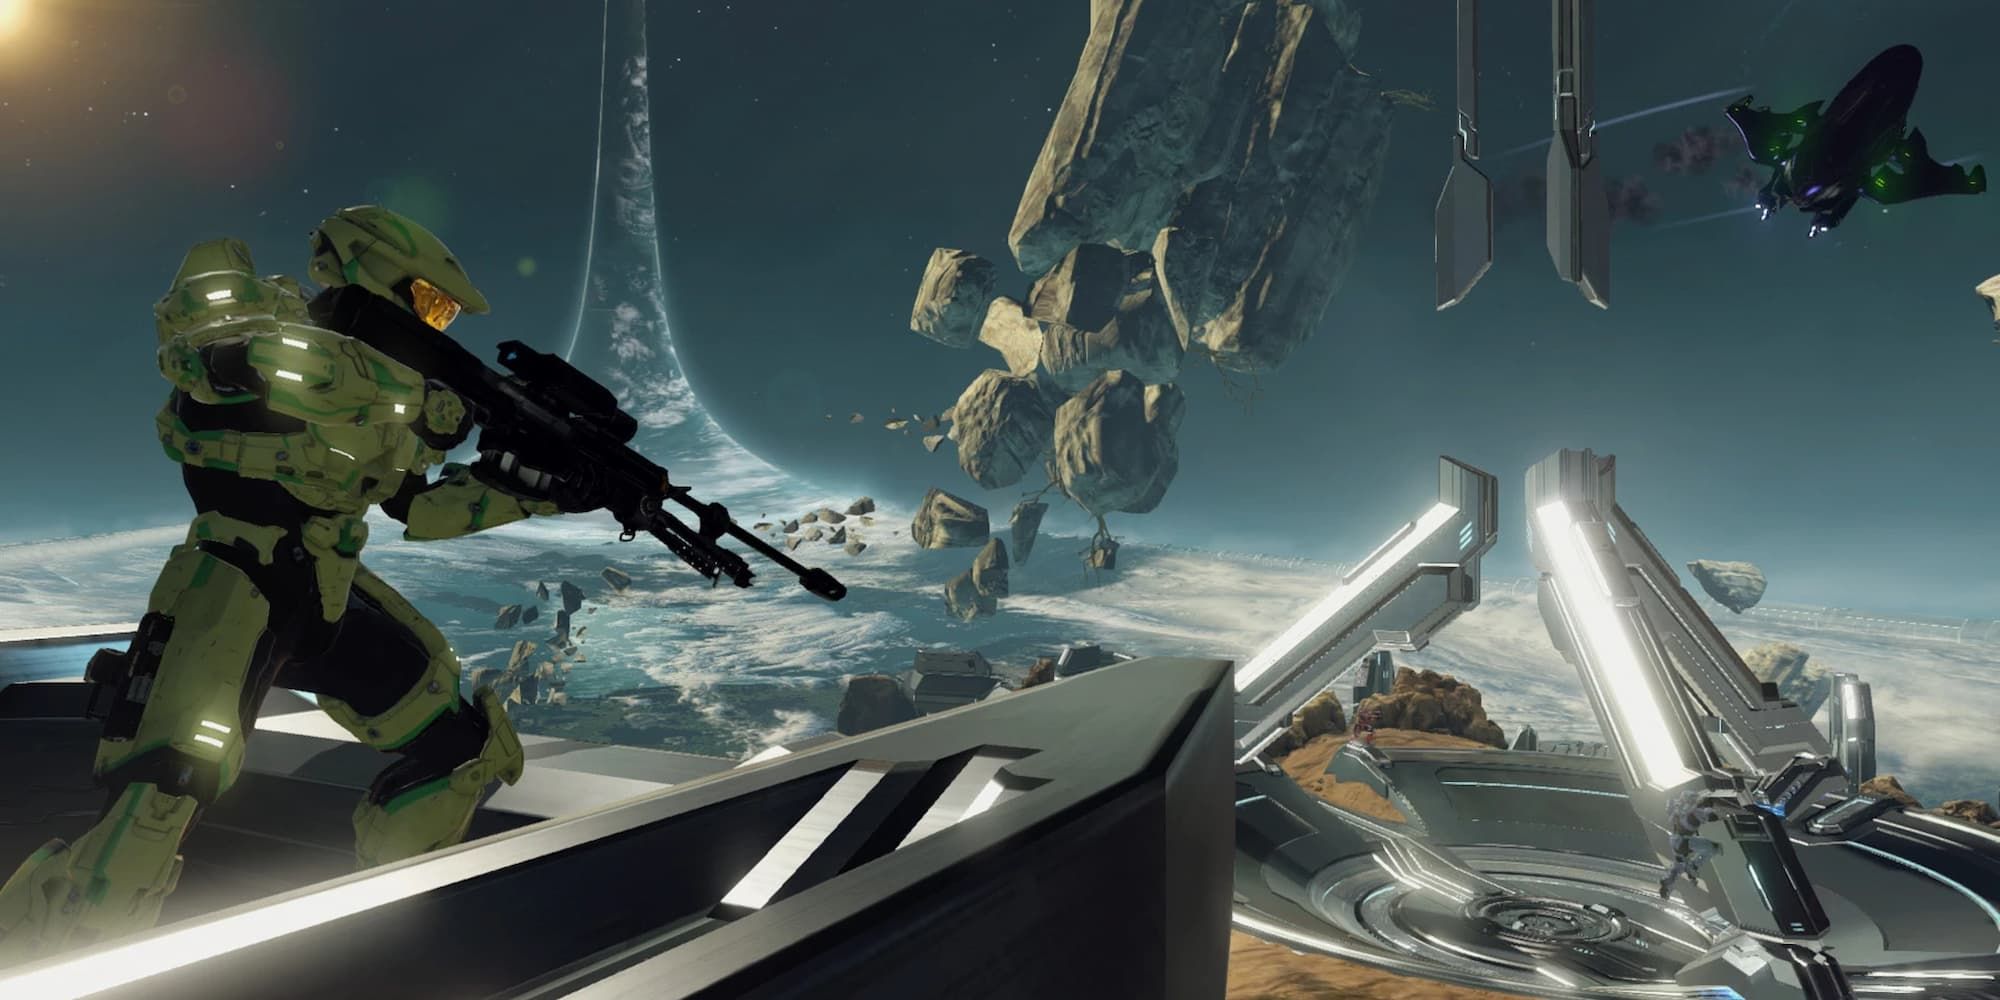 Master Chief stands on a platform with a sniper rifle as a Banshee flies by in Halo 2.